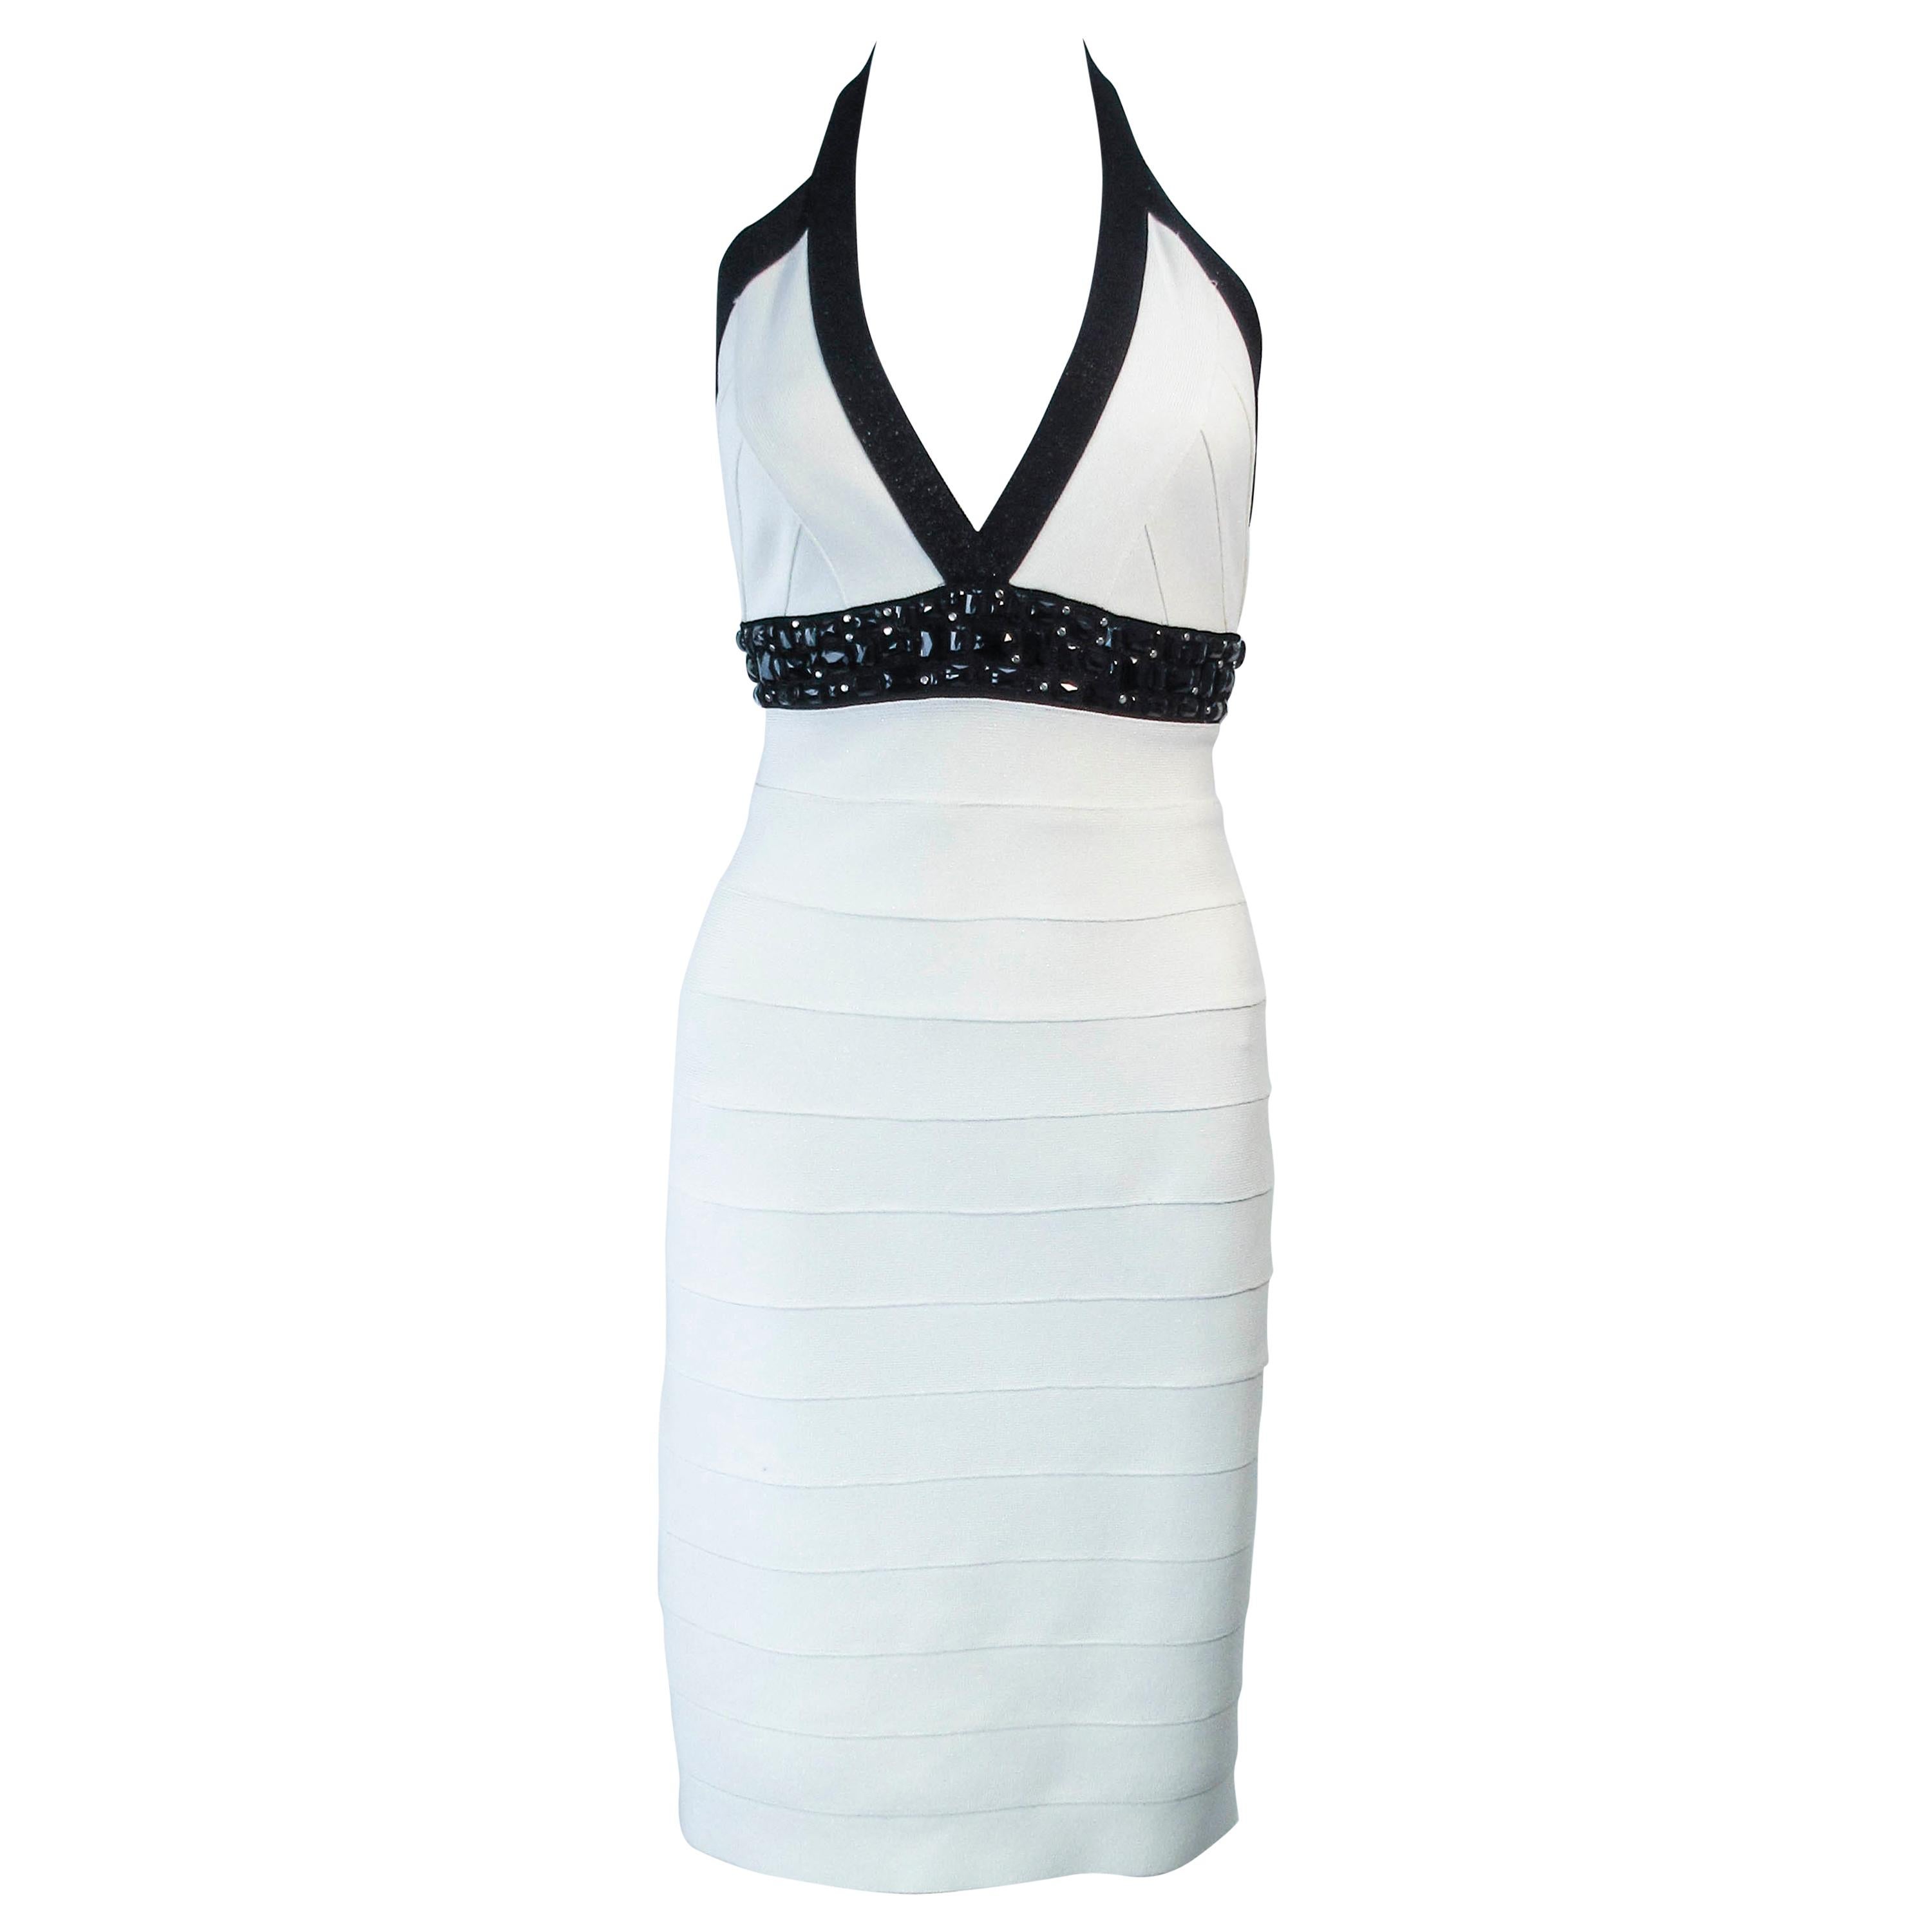 Herve Leger Black and White Metallic Body-con Bandage Dress with Beaded Accents